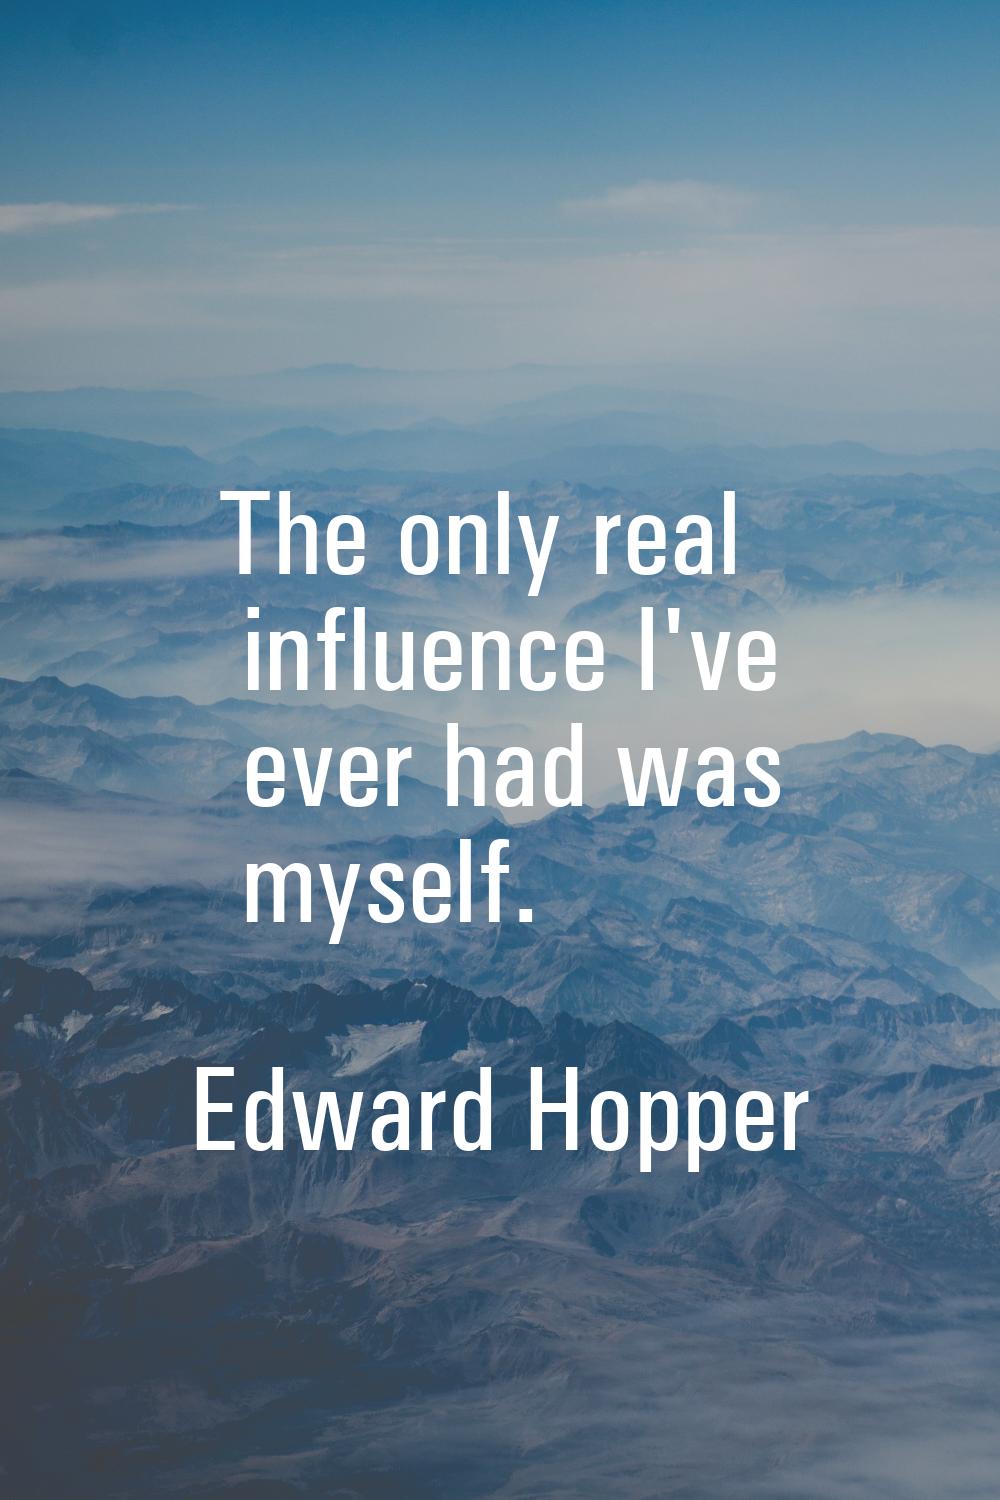 The only real influence I've ever had was myself.